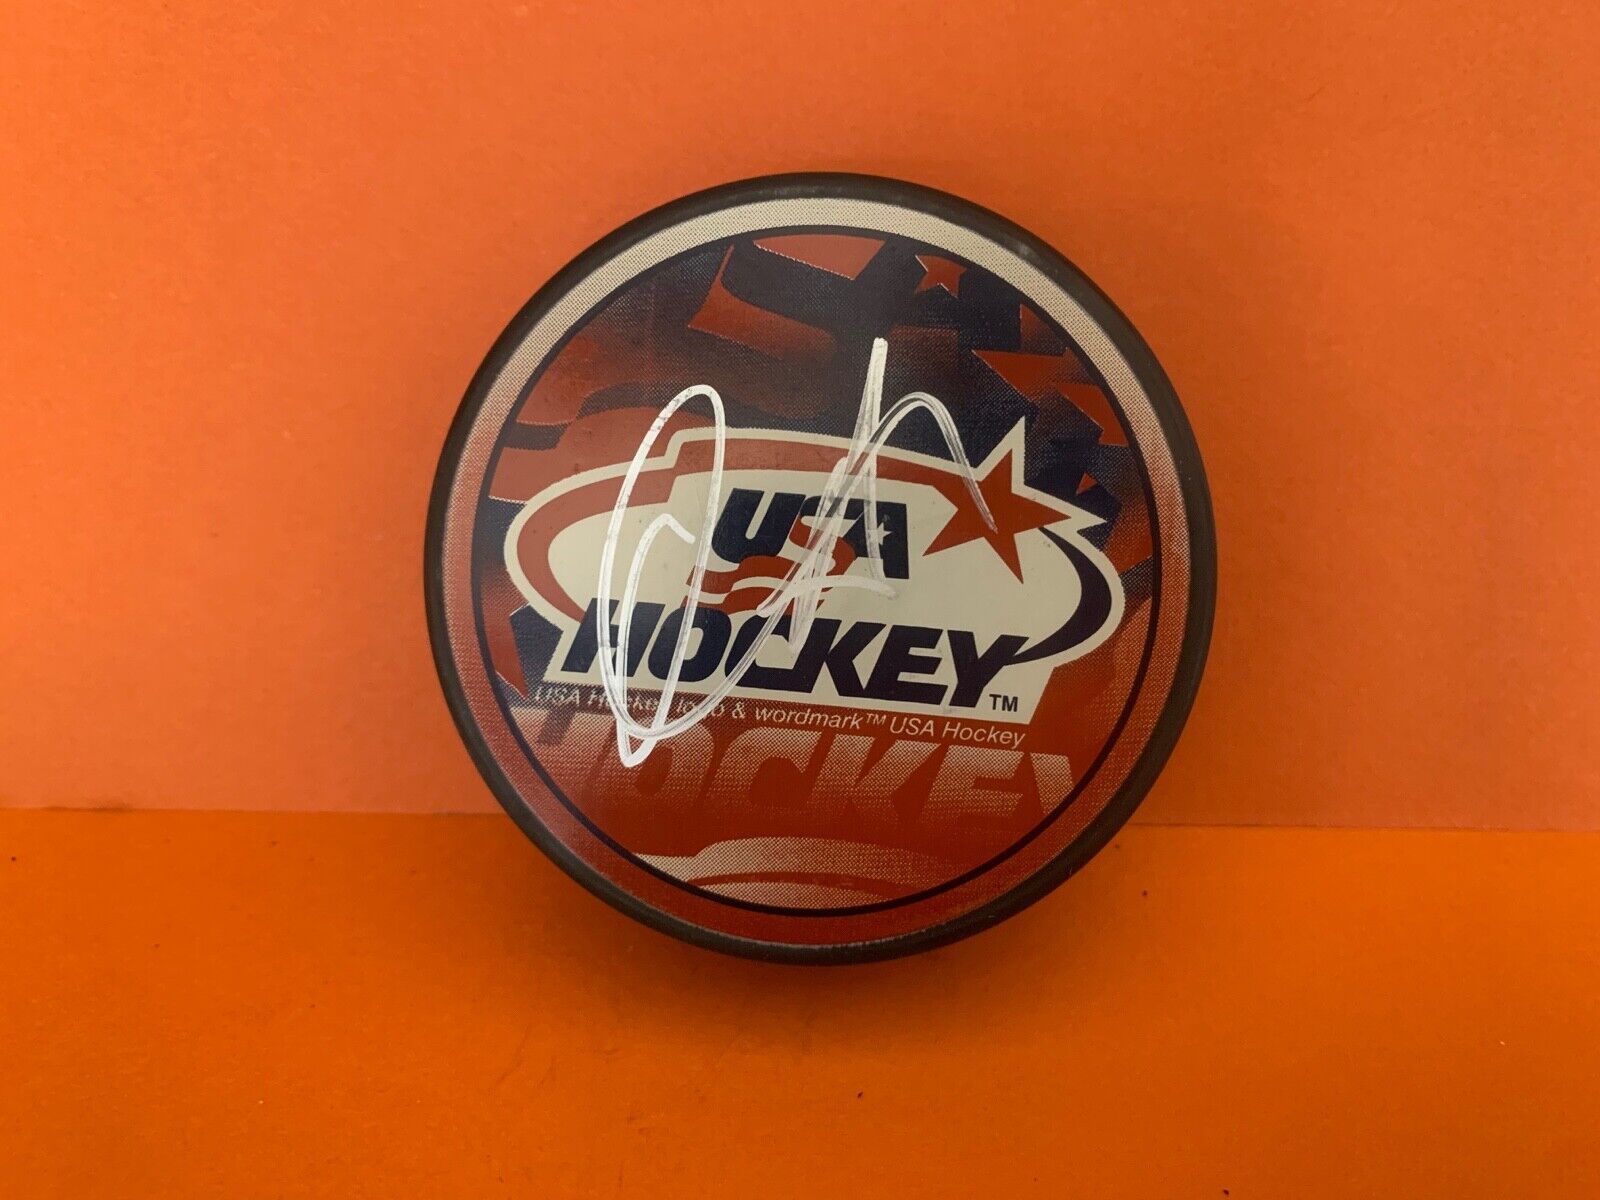 Chris Drury Autographed Signed Team USA Official Licensed Hockey Puck